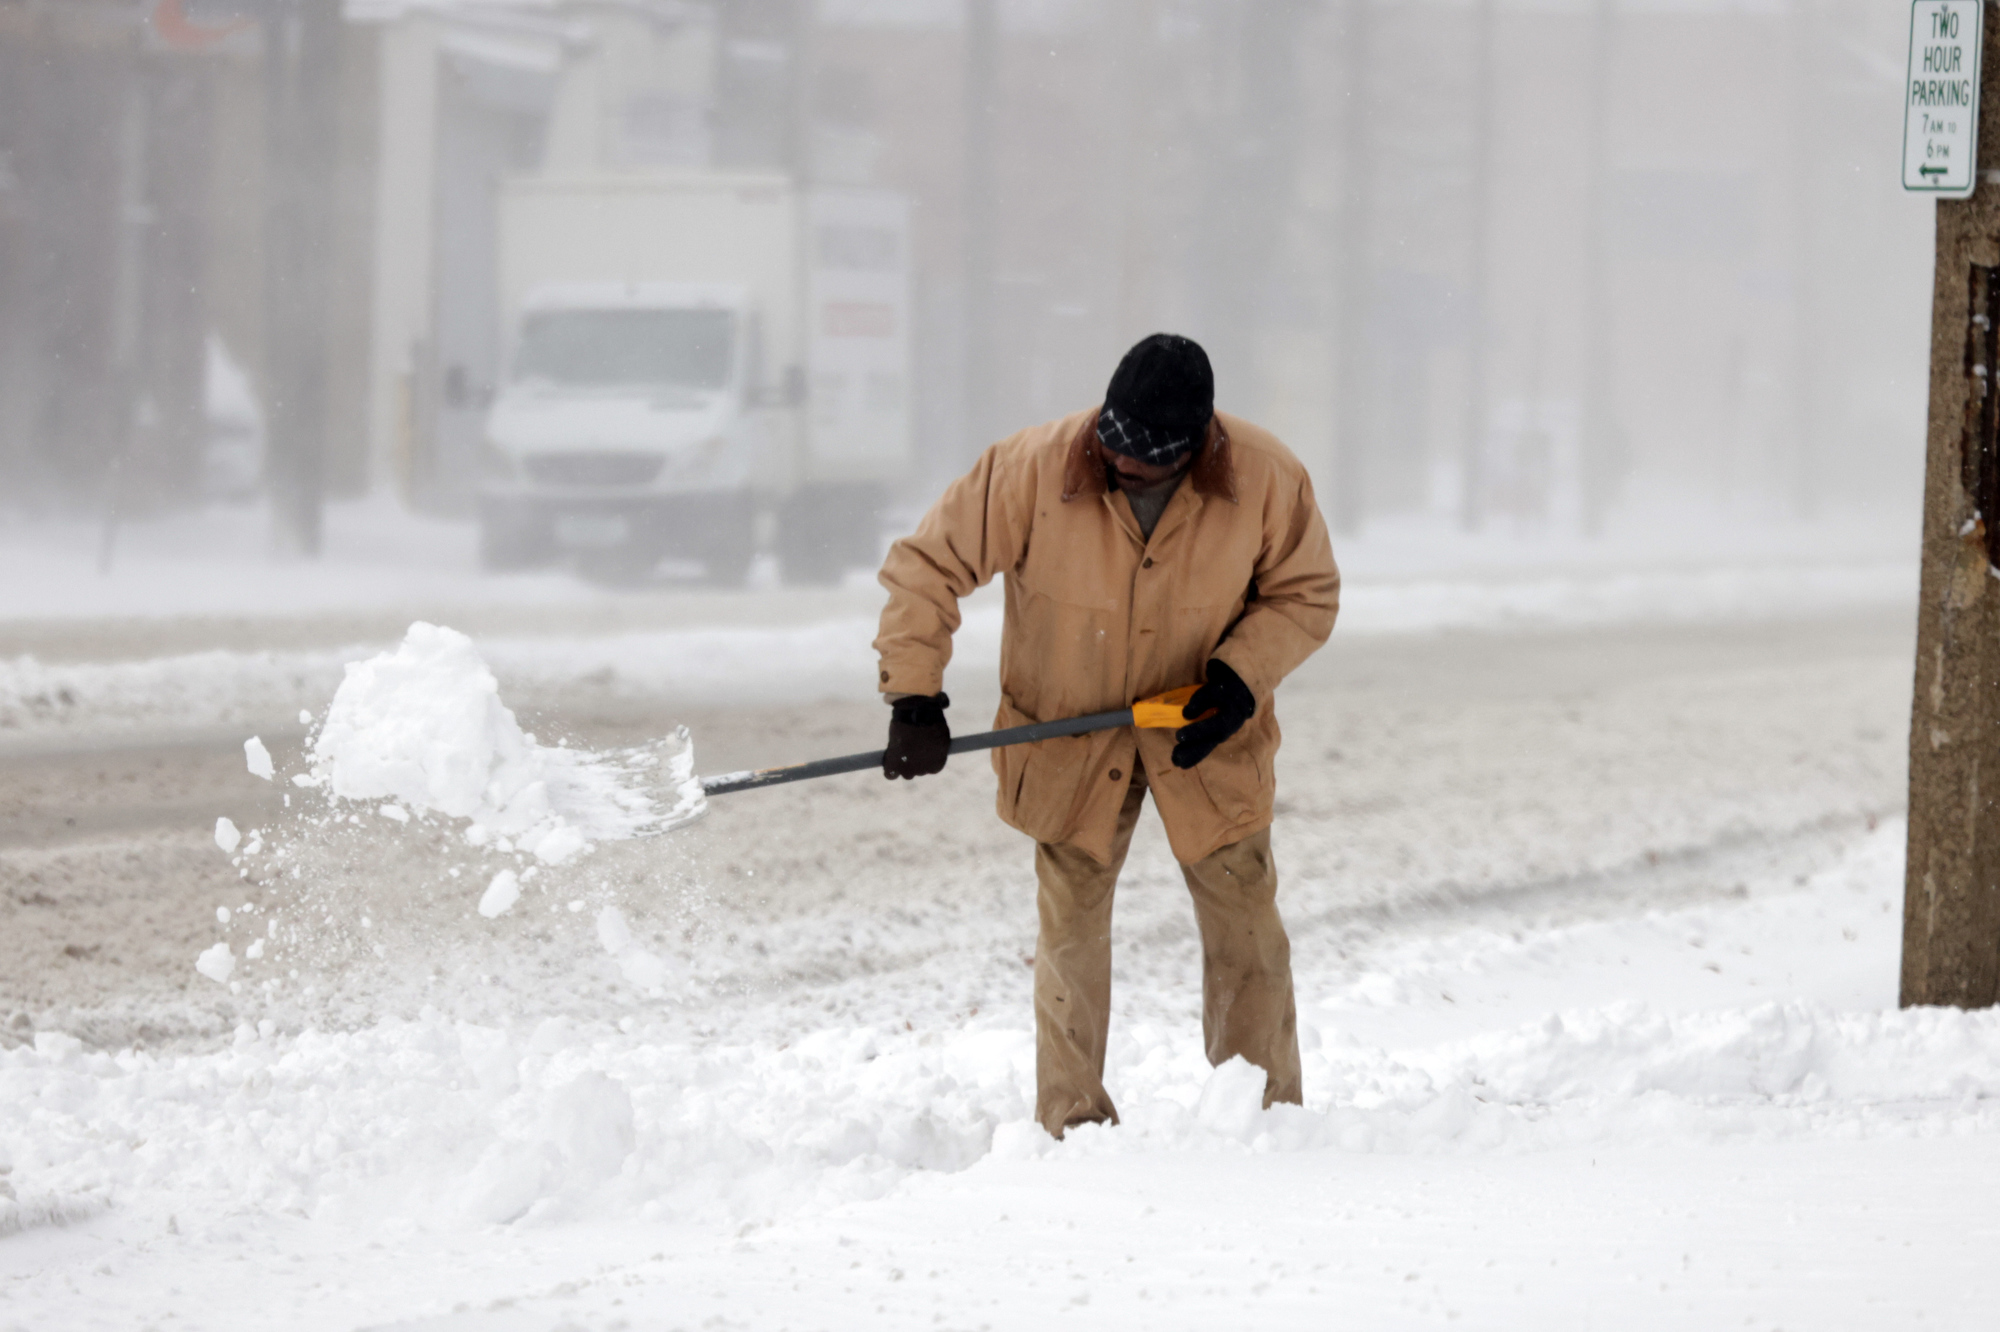 Now that most of the snow has been washed away, where does Cleveland stand  for snow vs. other winters? 